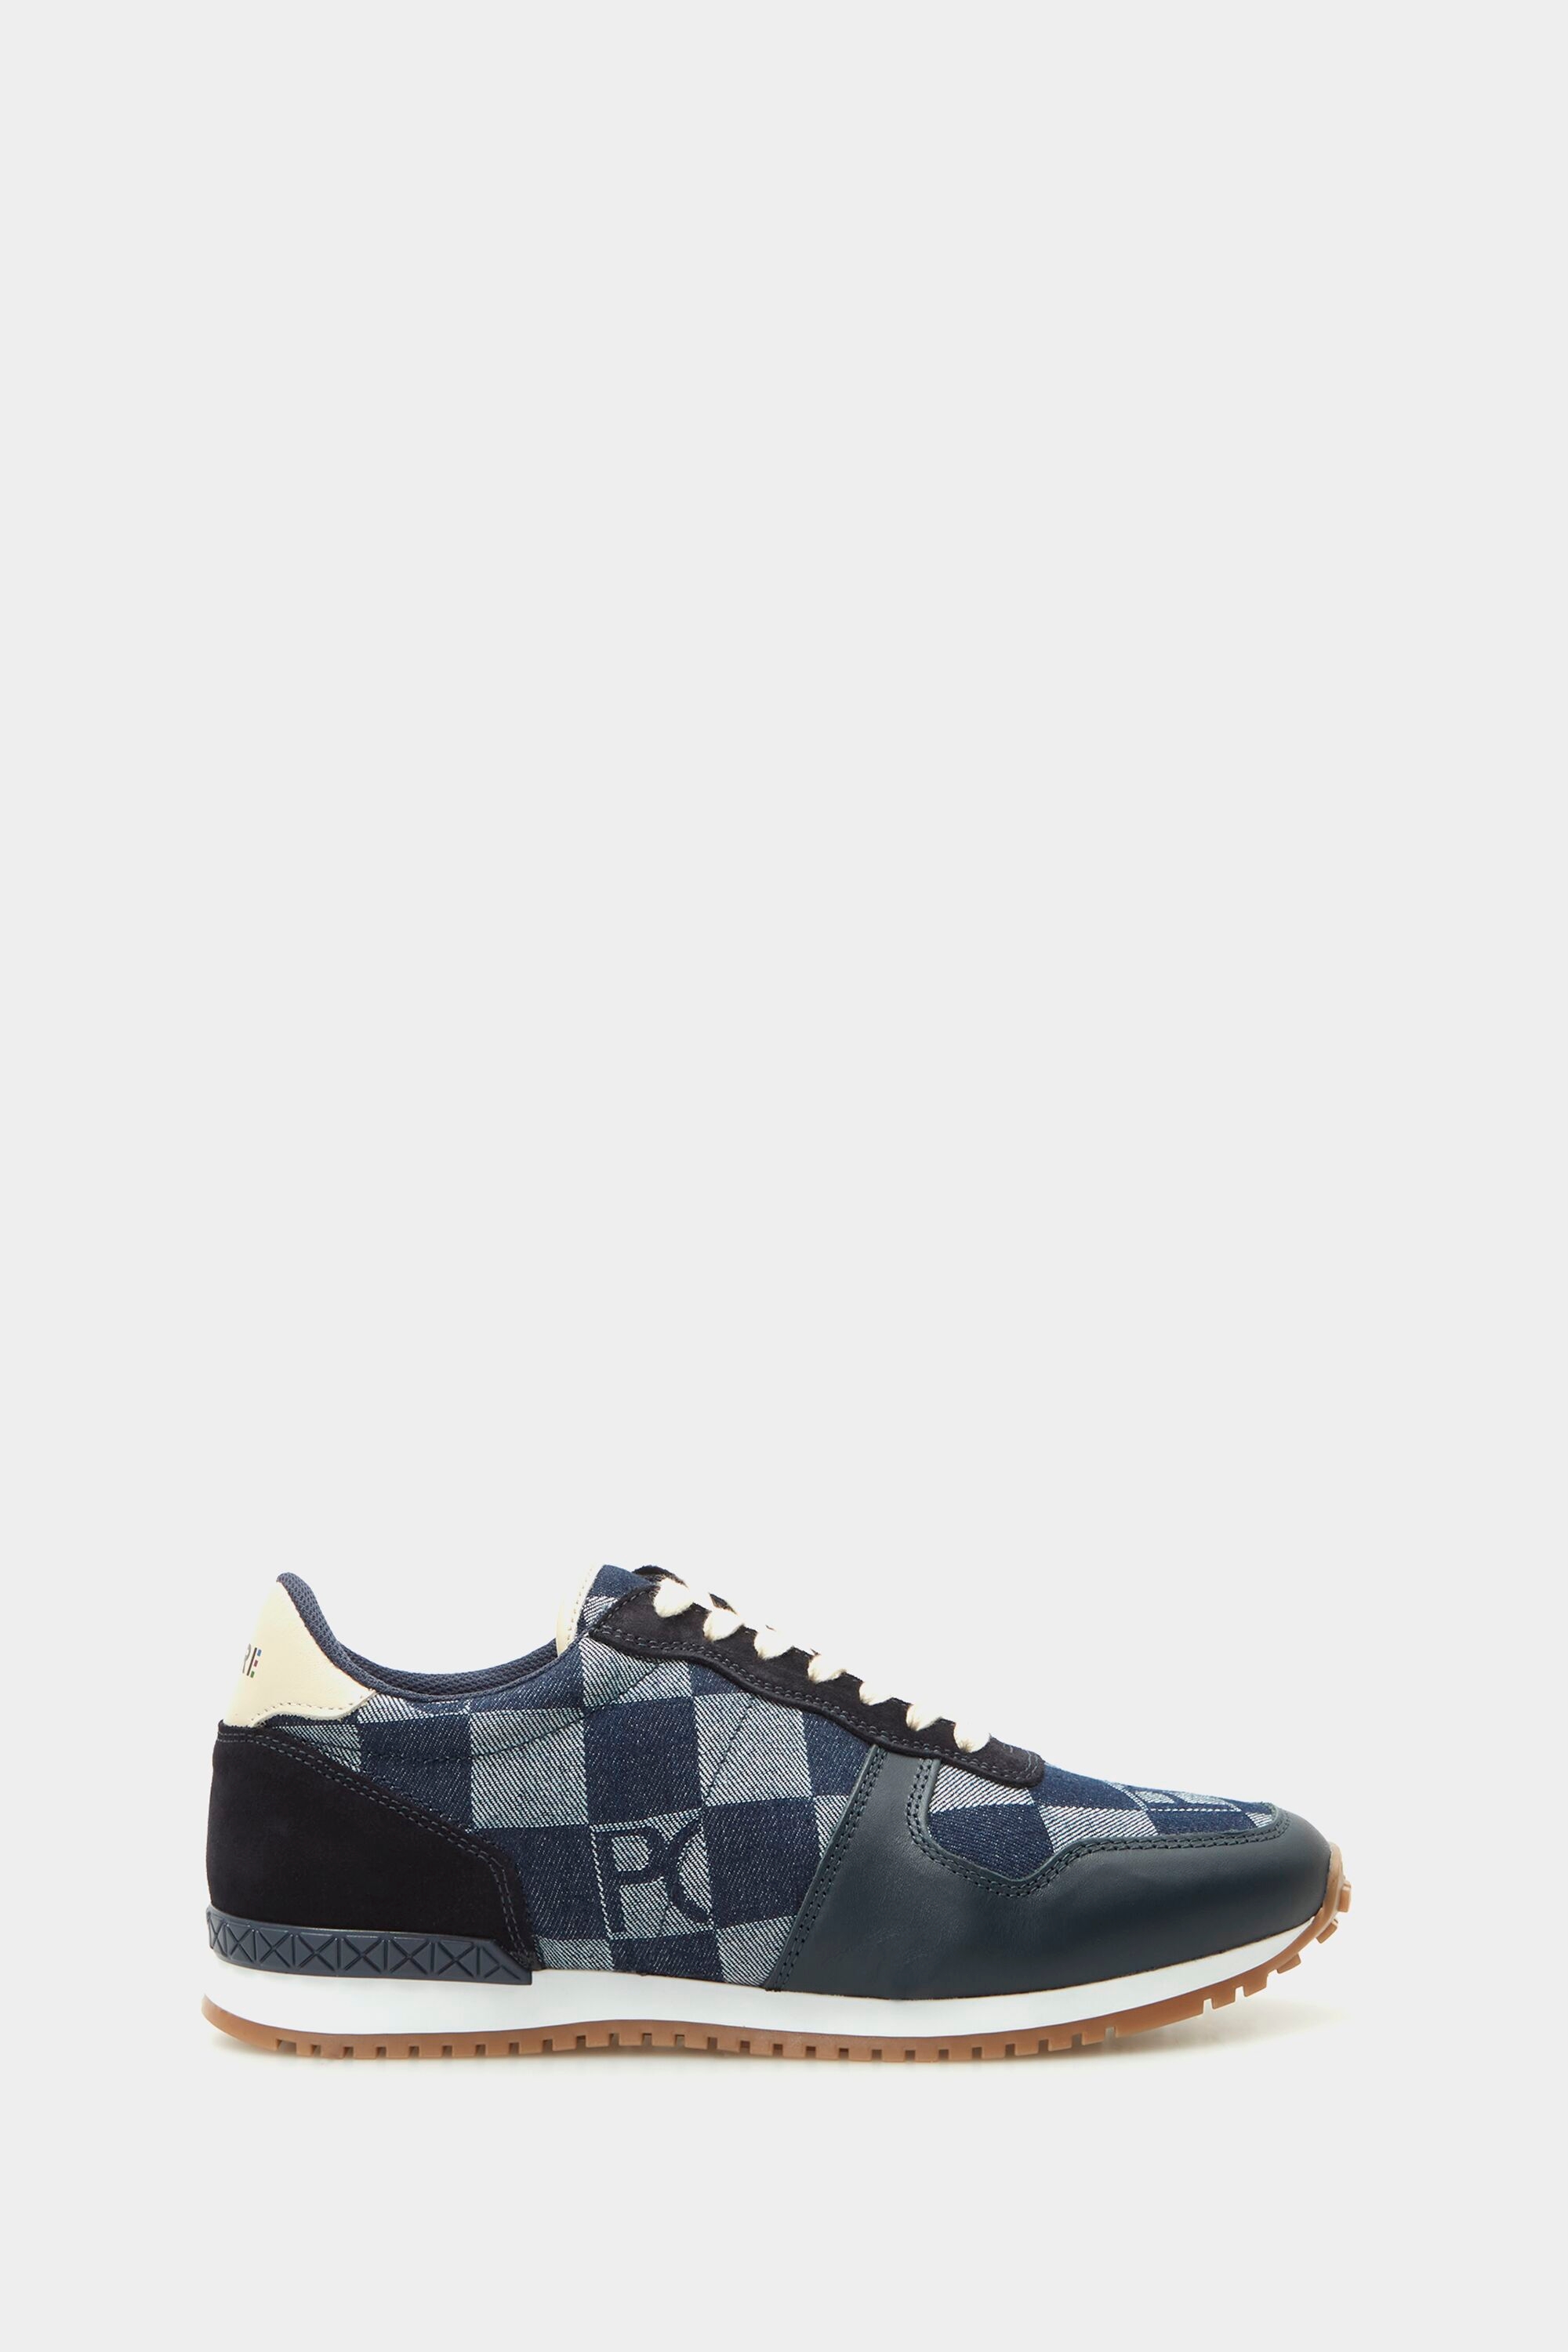 Denim Cubes canvas and leather sneakers